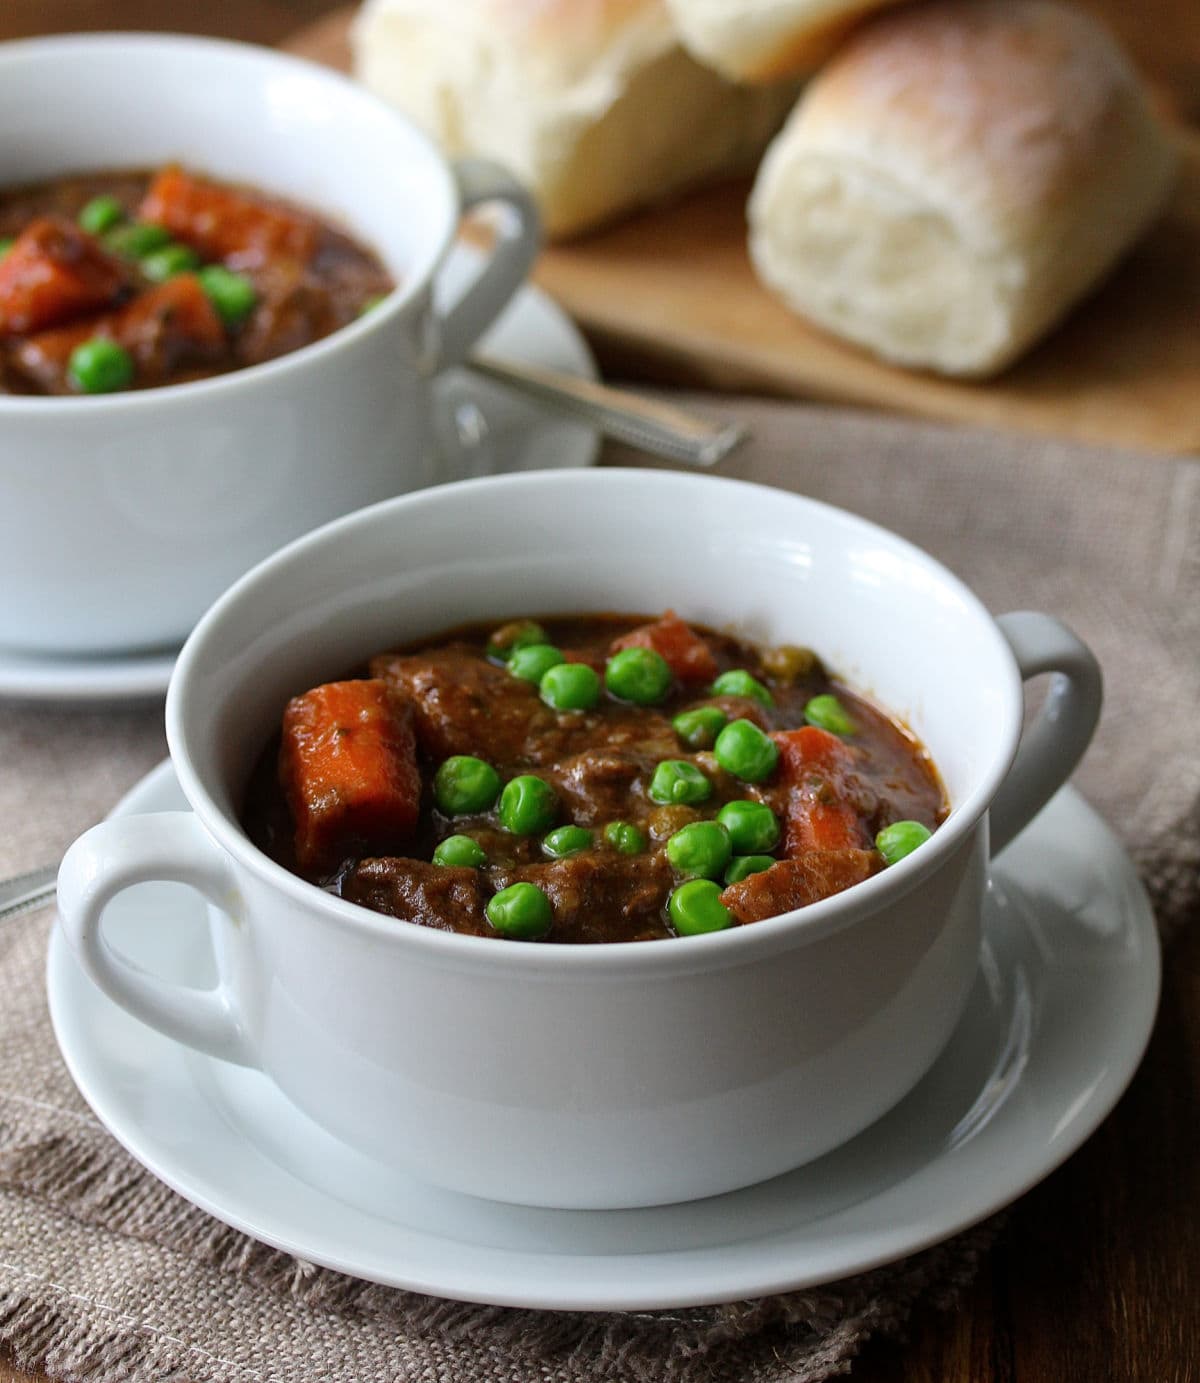 Beef stew in bowls.